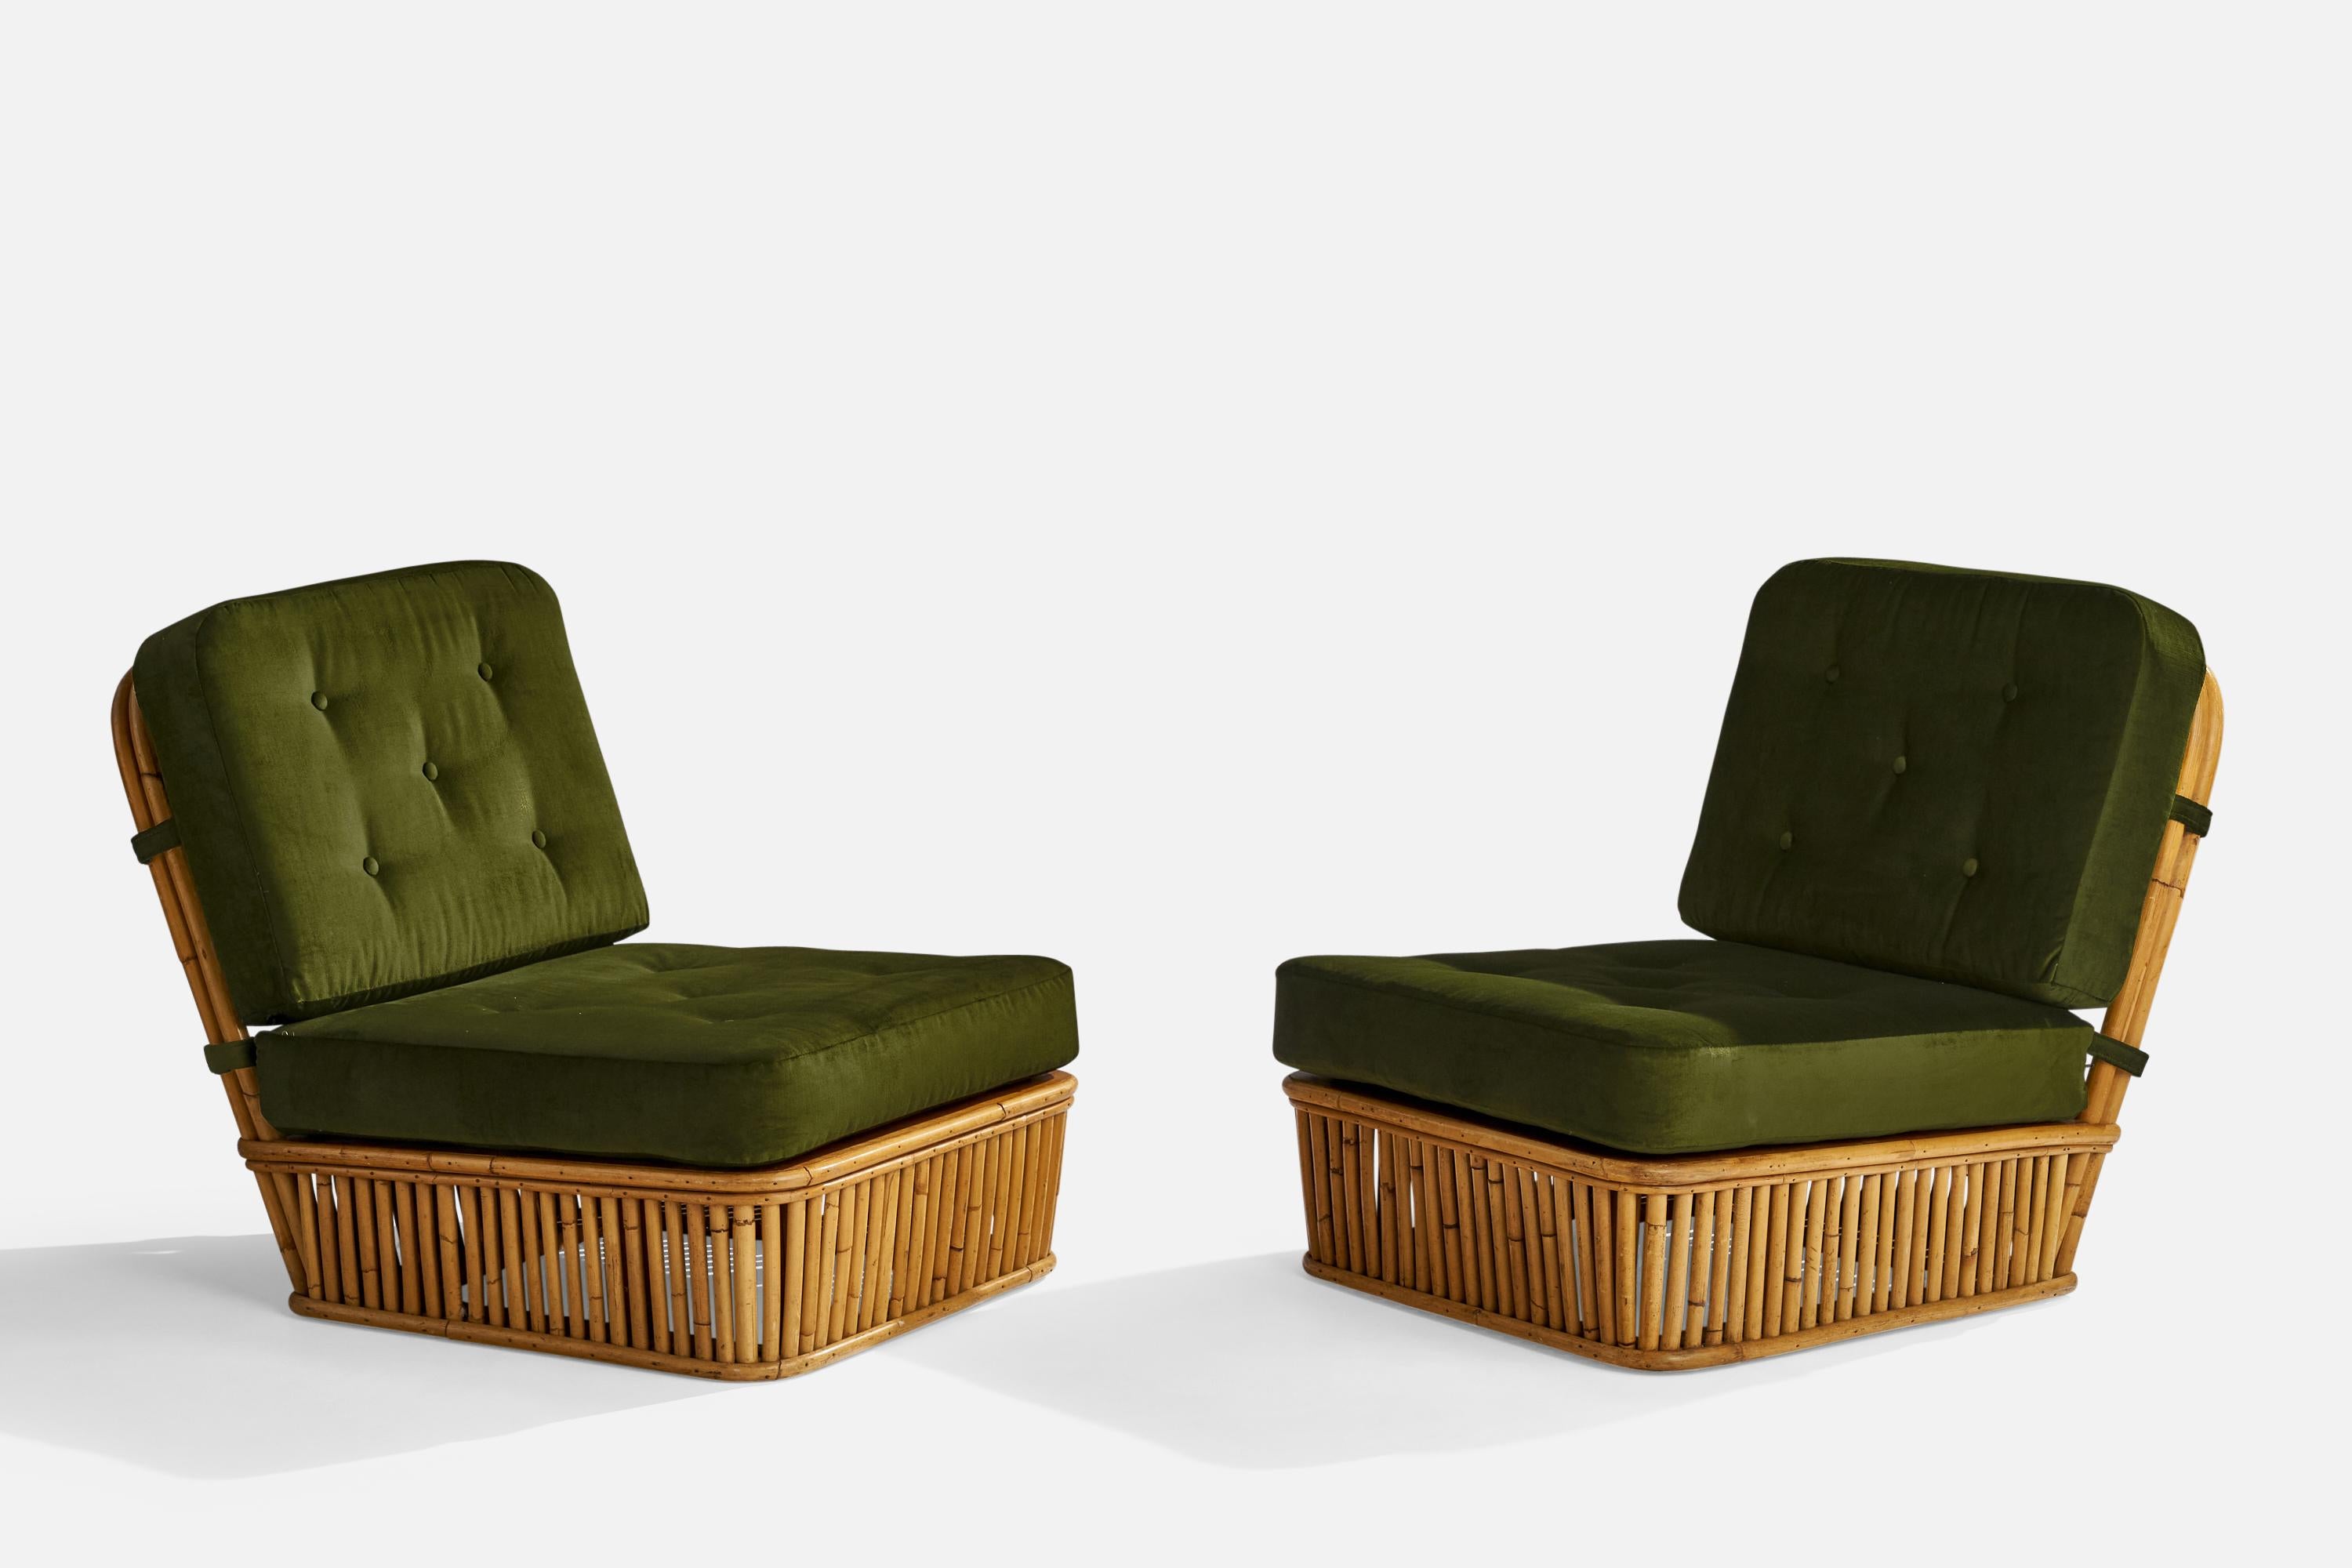 A pair of green velvet and bamboo slipper chairs designed by Paul Frankl and produced by Ficks Reed, USA, 1952.

Seat height 14.25”